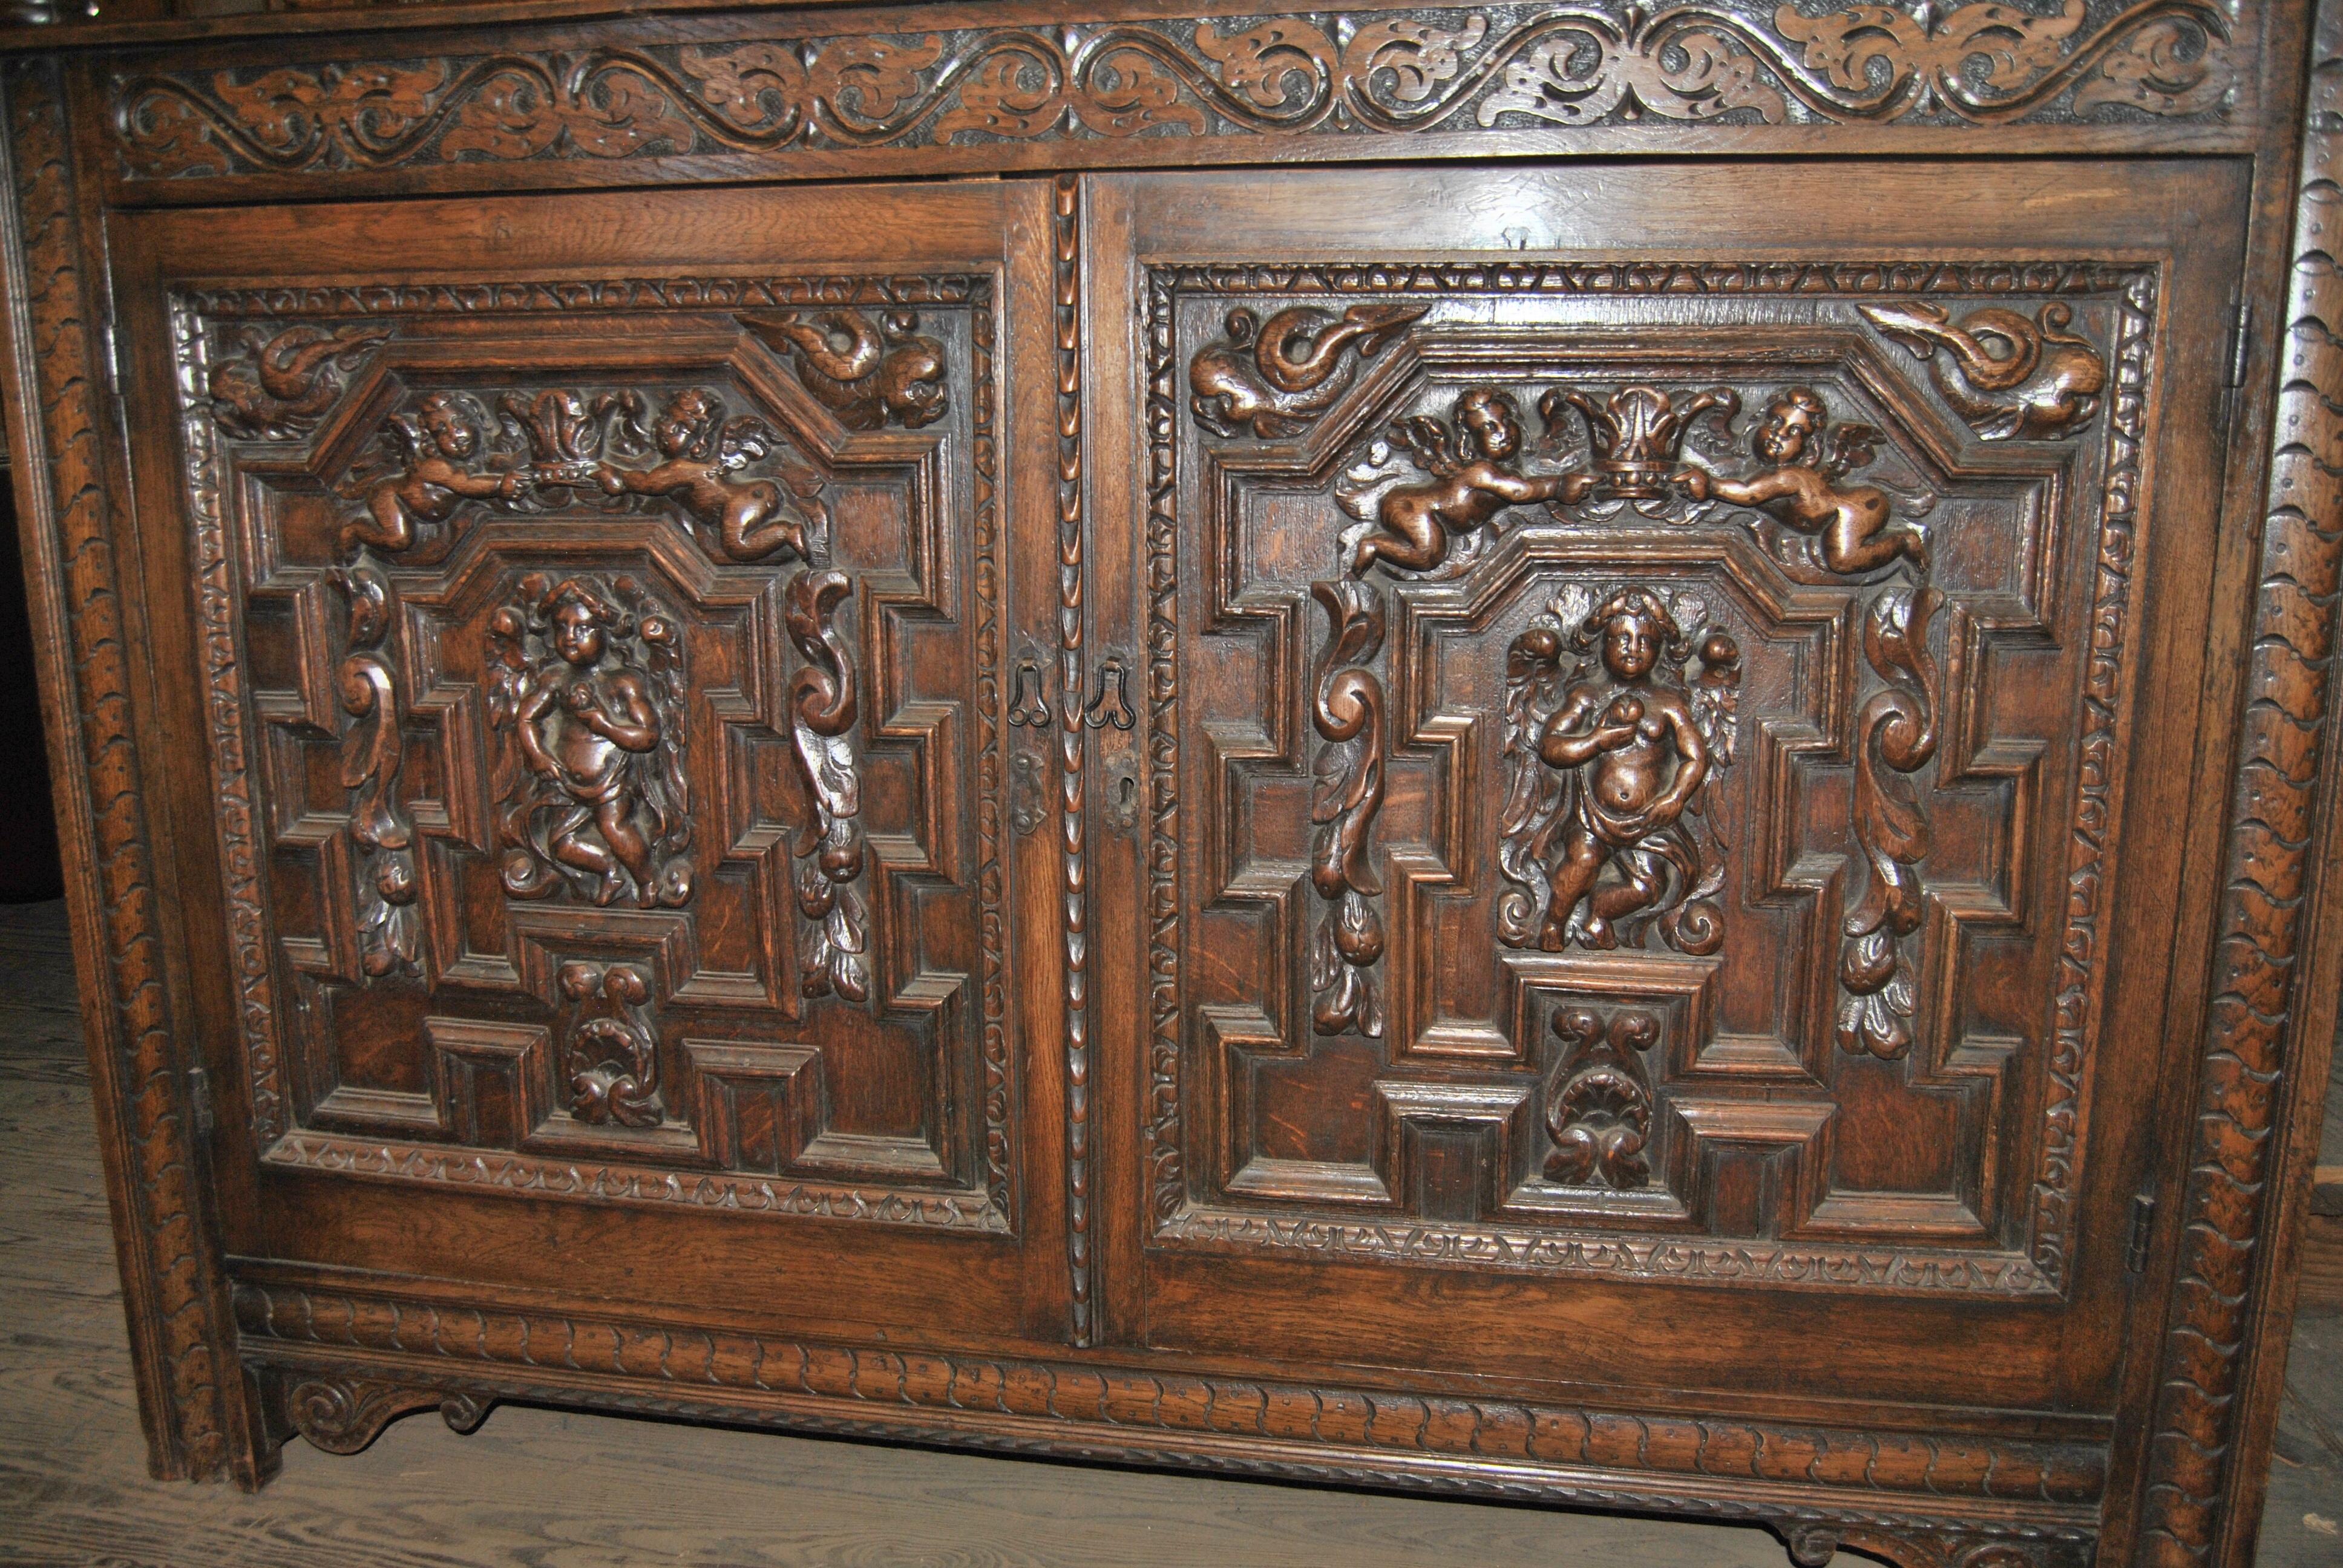 This is a fabulous quality, heavily carved solid oak court cupboard, made in England, circa 1850. The geometric moldings on the panels and doors are absolutely unbelievable. The quality and depth of all the hand carving is amazing. The door on the